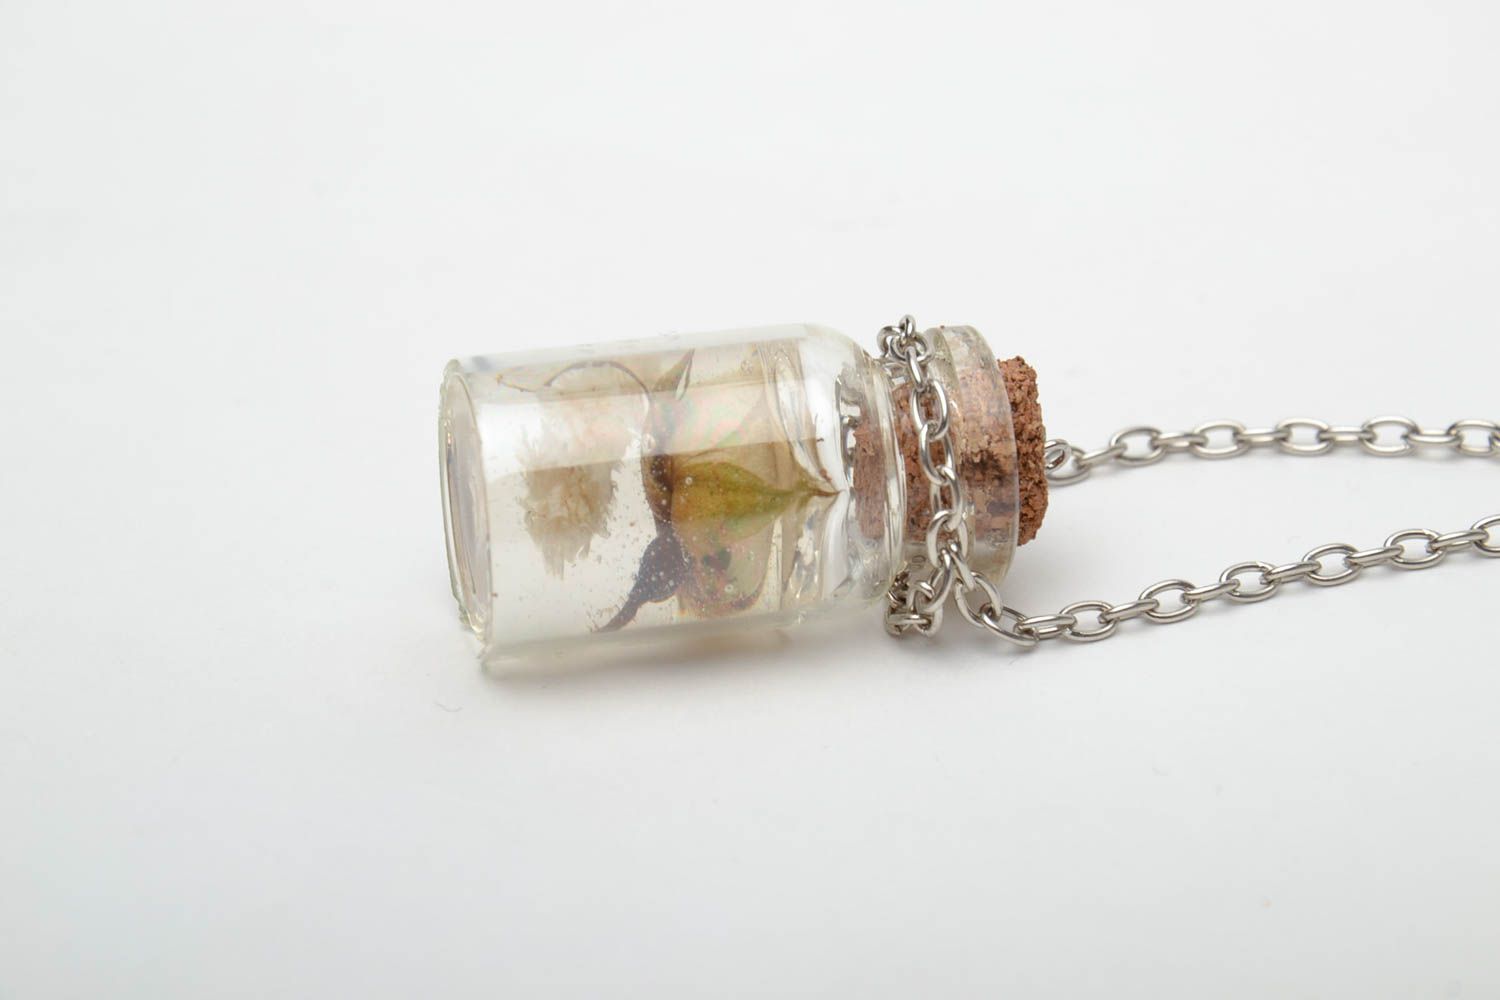 Interior pendant Bottle with Chain photo 3